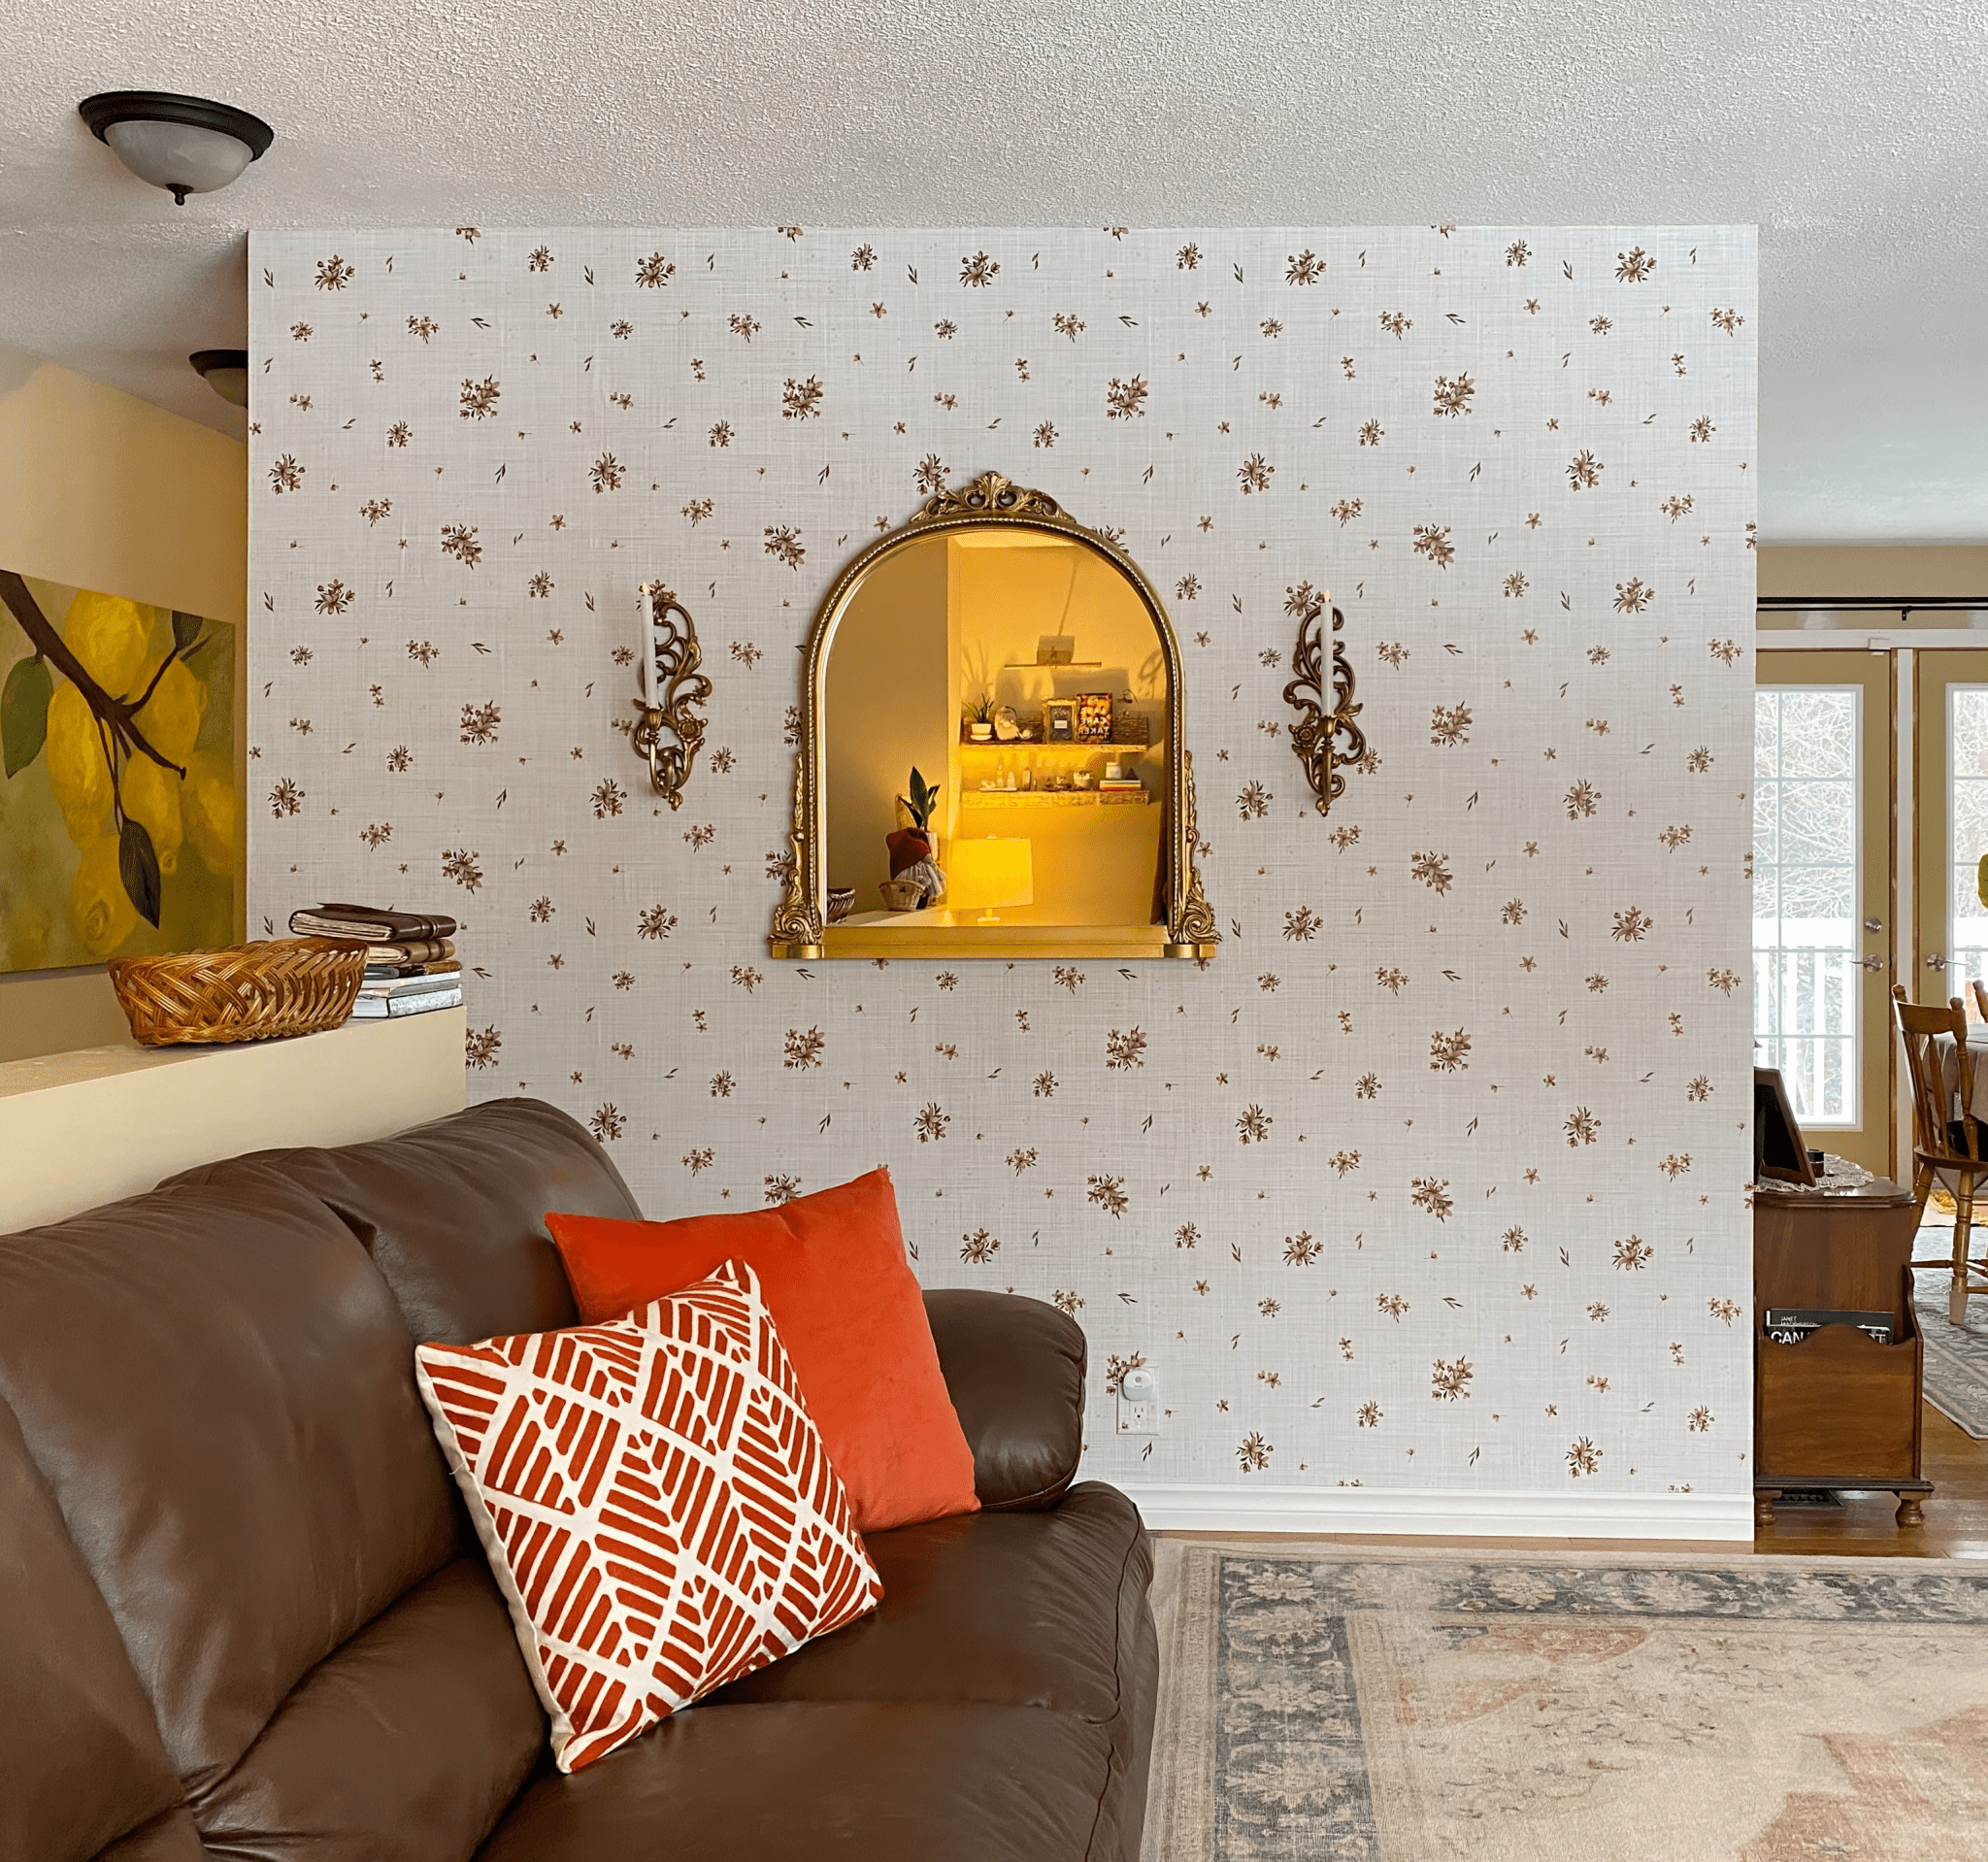 A room with a wall covered in beige wallpaper featuring a floral motif with brown and pink flowers. A gold-framed mirror and ornate sconces are on the wall.